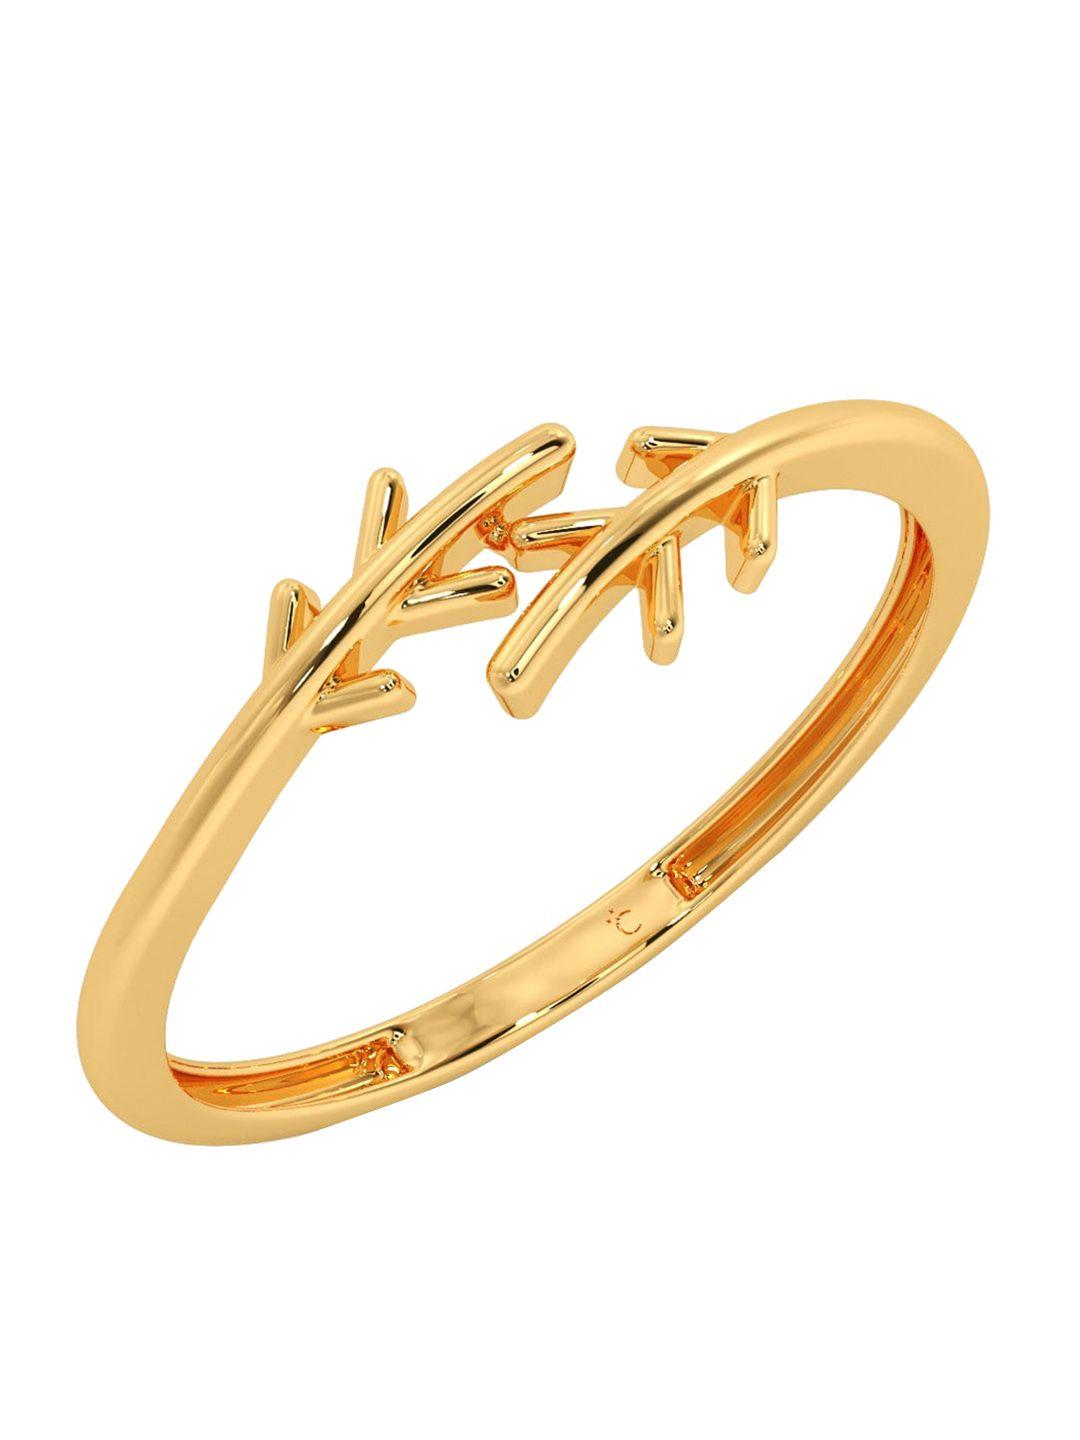 CANDERE A KALYAN JEWELLERS COMPANY 18KT Gold Ring-1.12gm